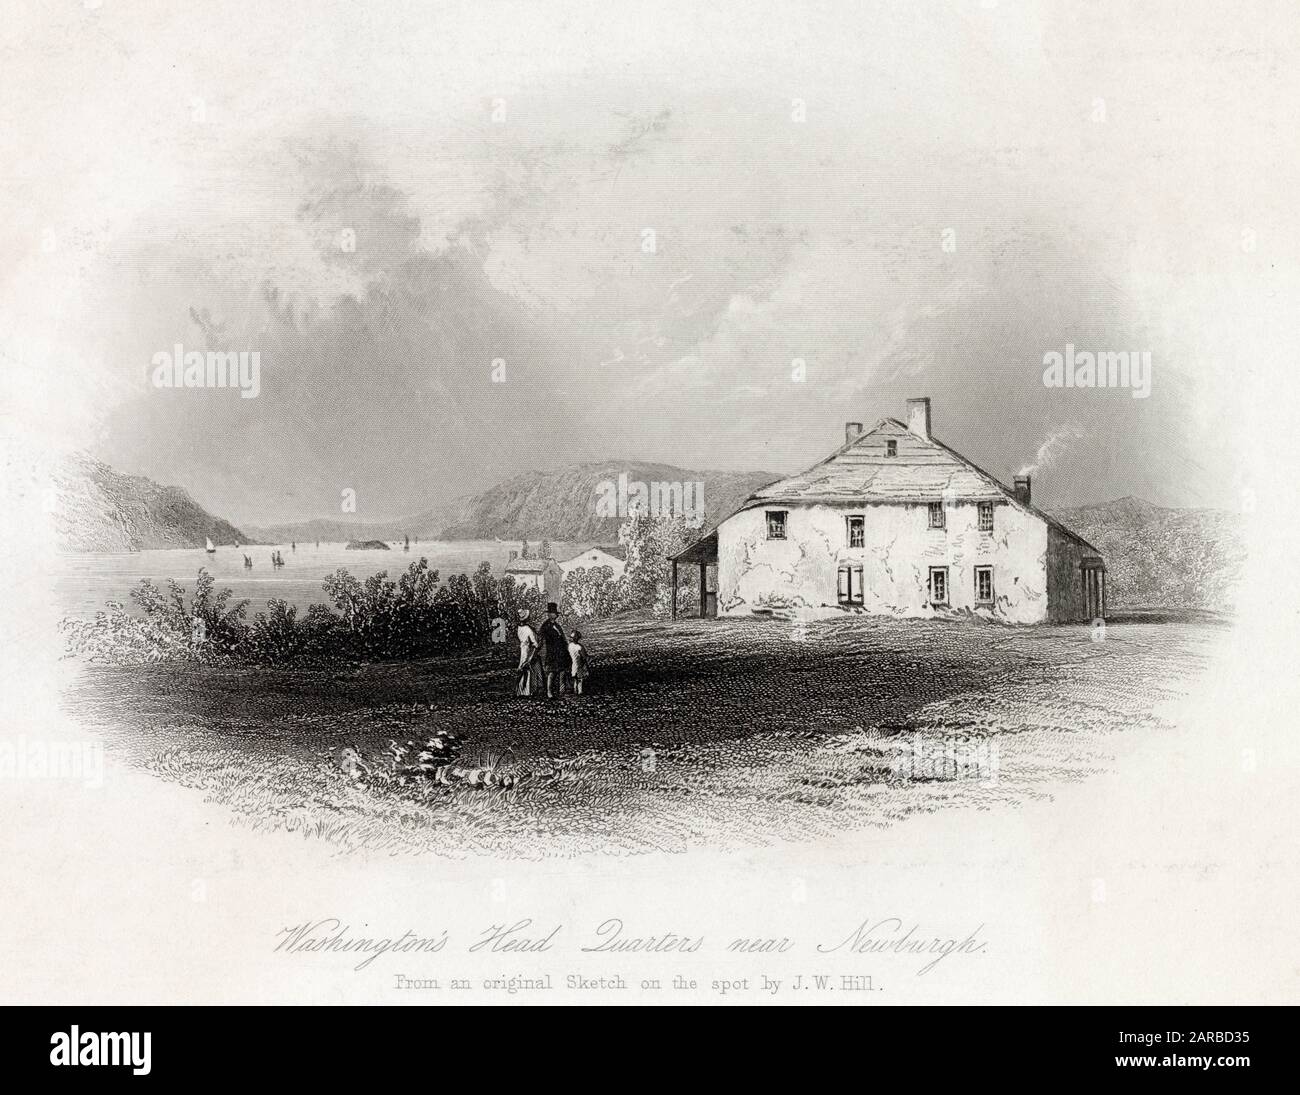 George Washigton's Headquarters at Newburgh,New York During The American War of Independence.     Date: 1782 Stock Photo